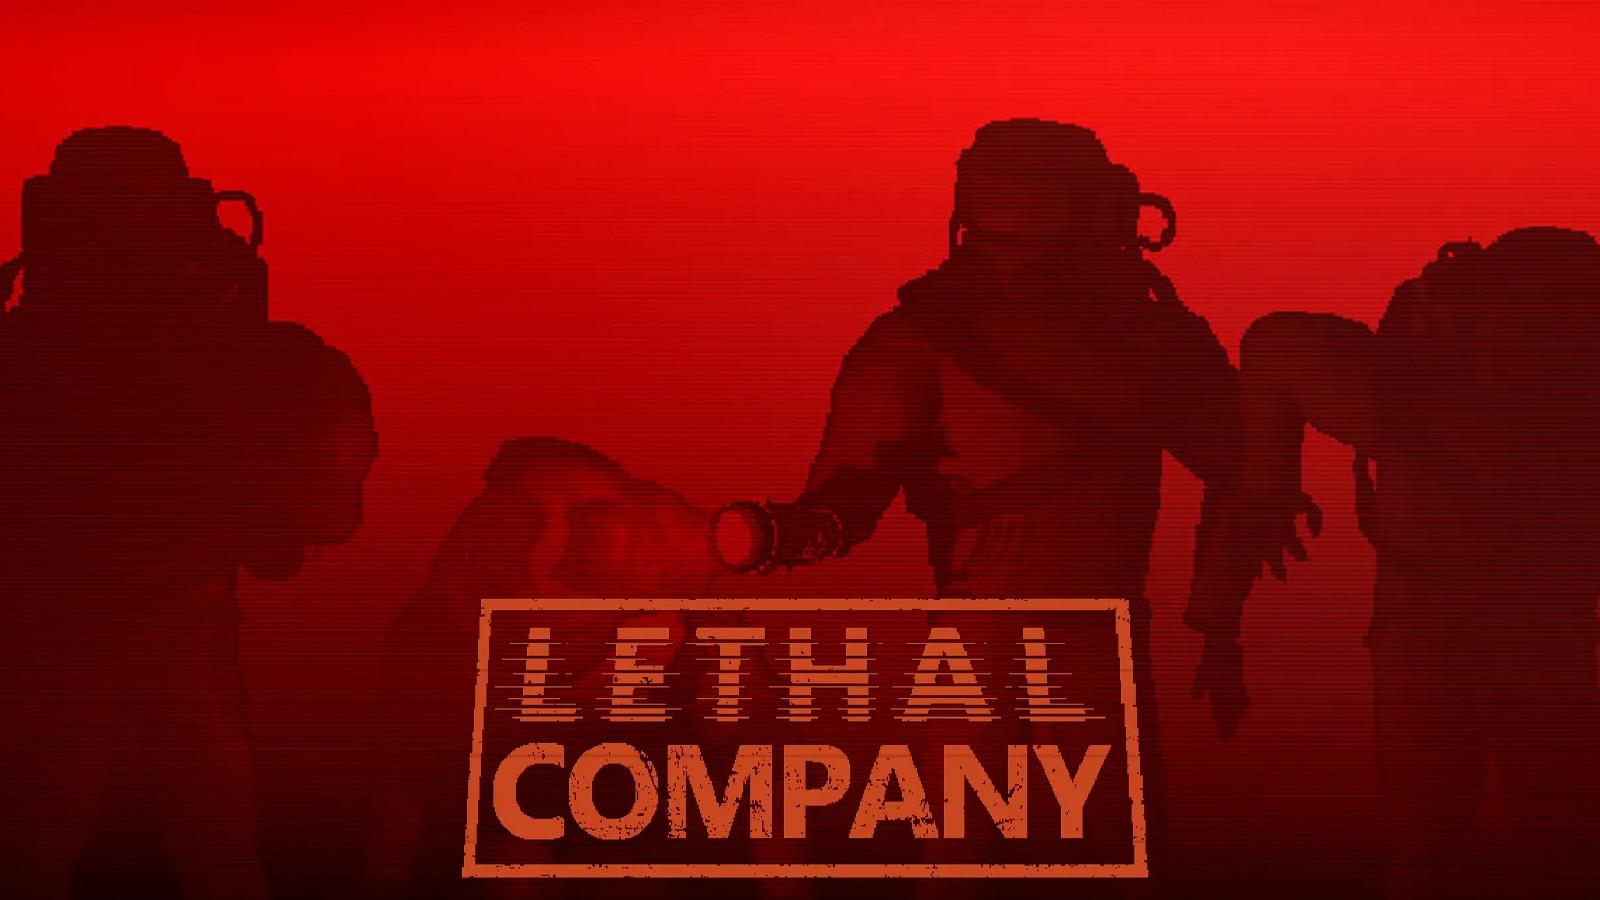 Lethal company becomes one of steam's most popular games